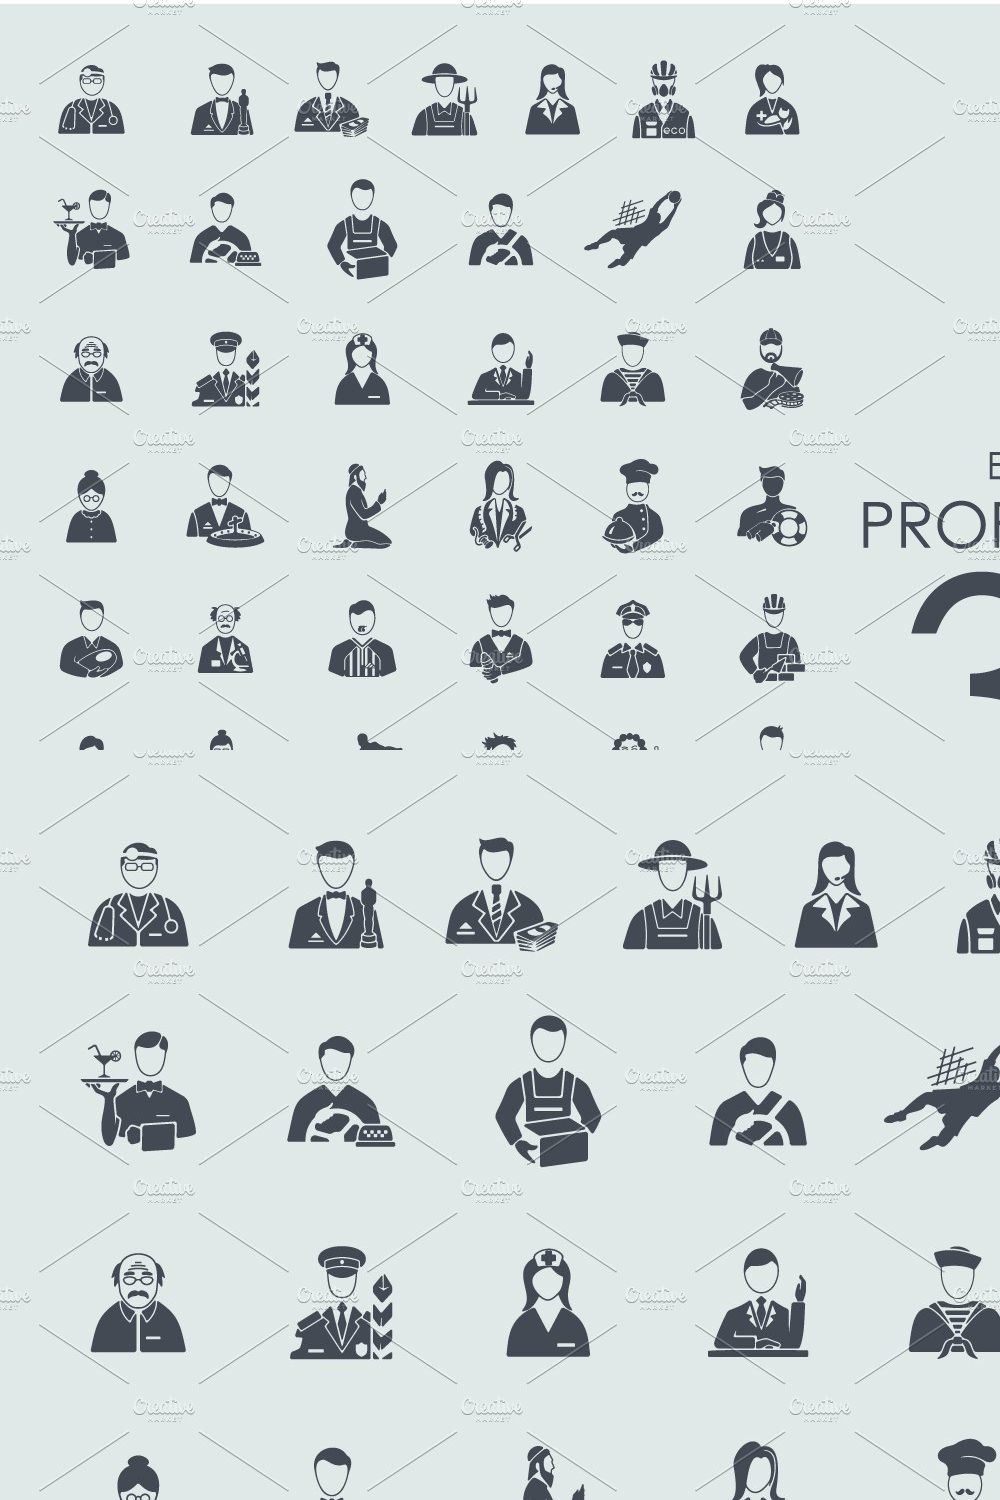 37 professions icons pinterest preview image.